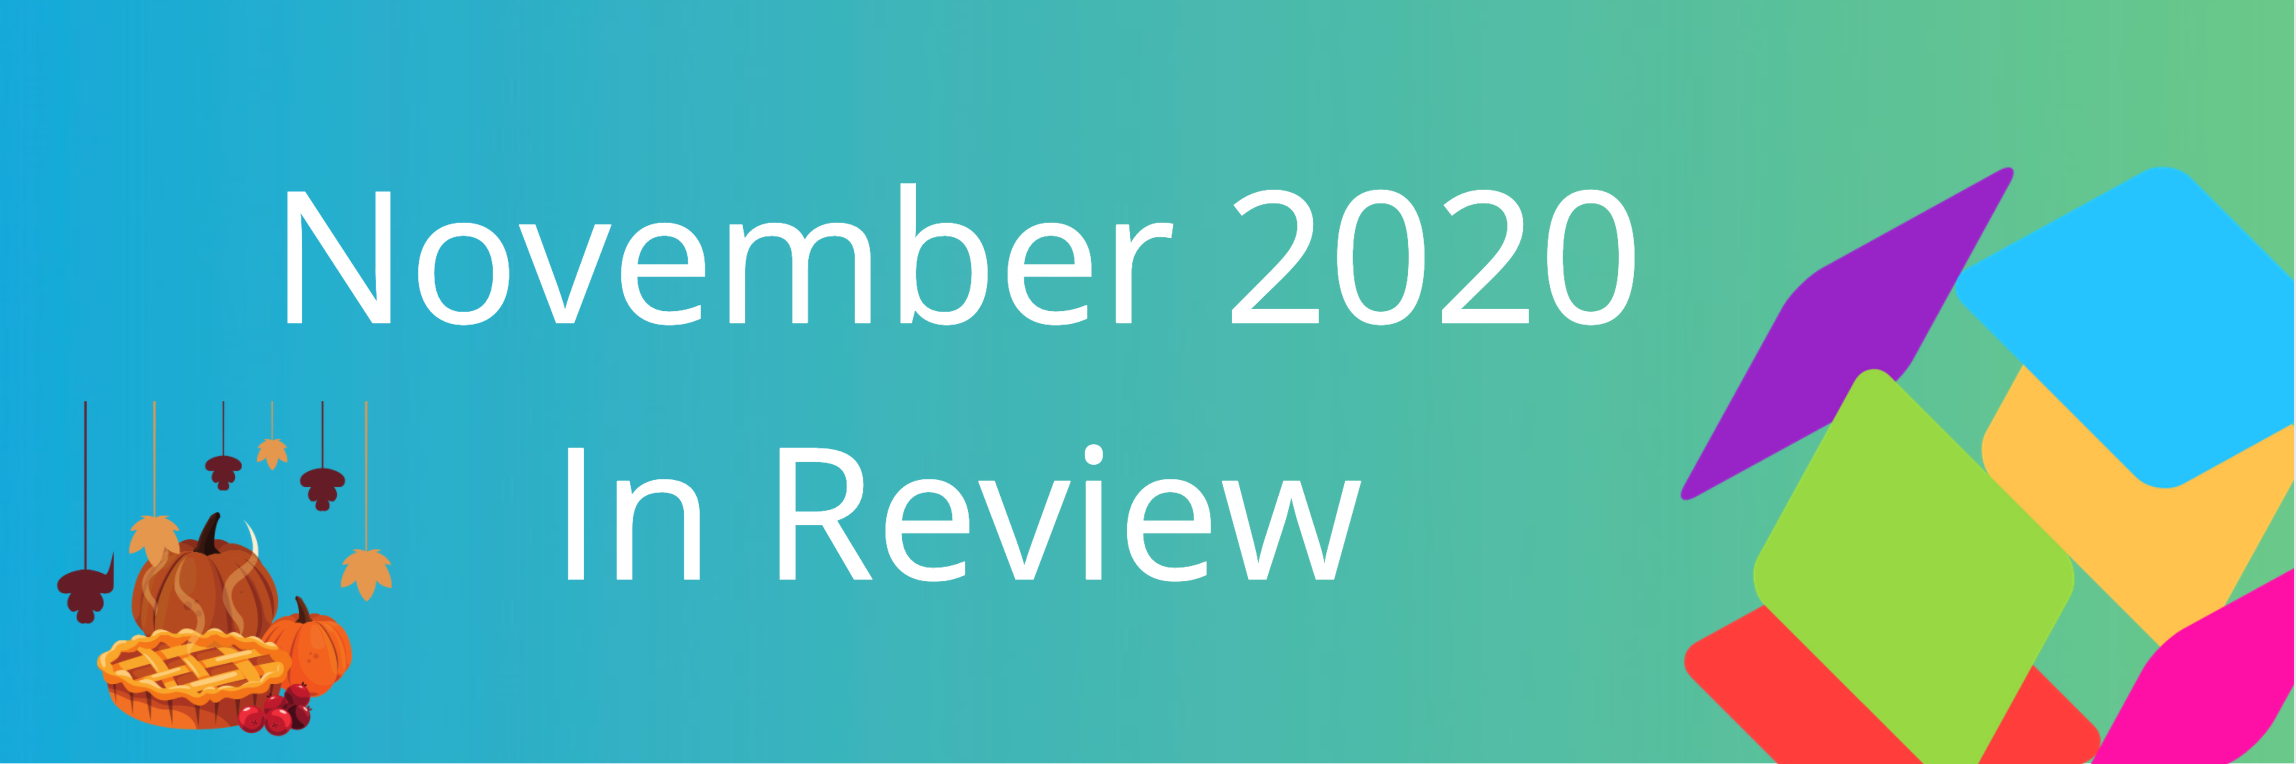 November 2020 in Review Feature Image